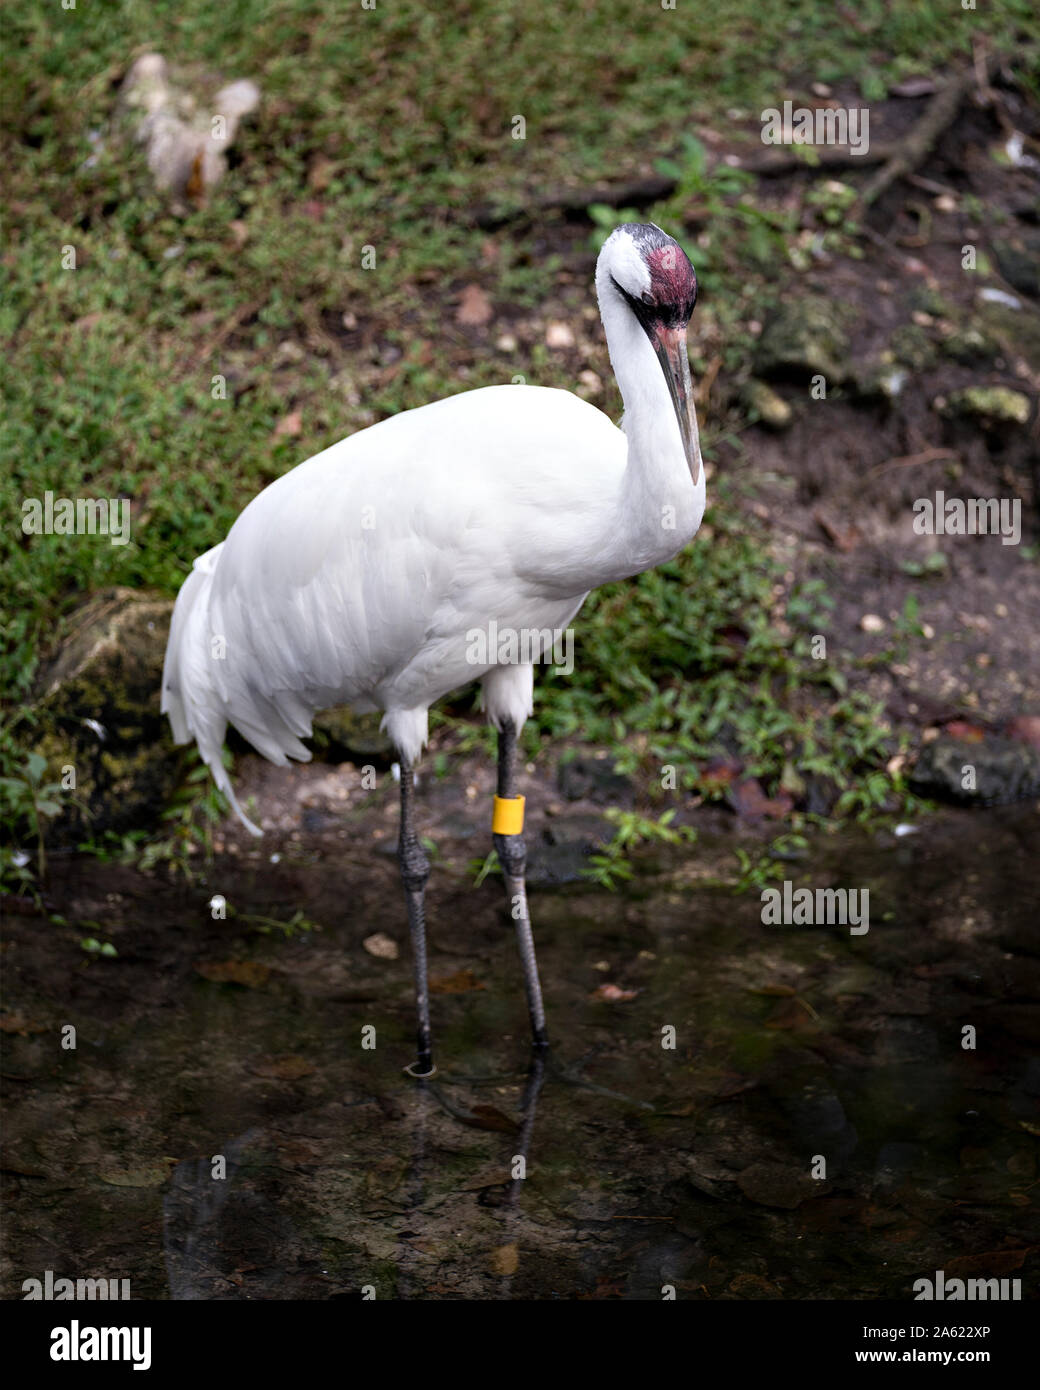 Whooping crane bird standing tall in the water. Stock Photo